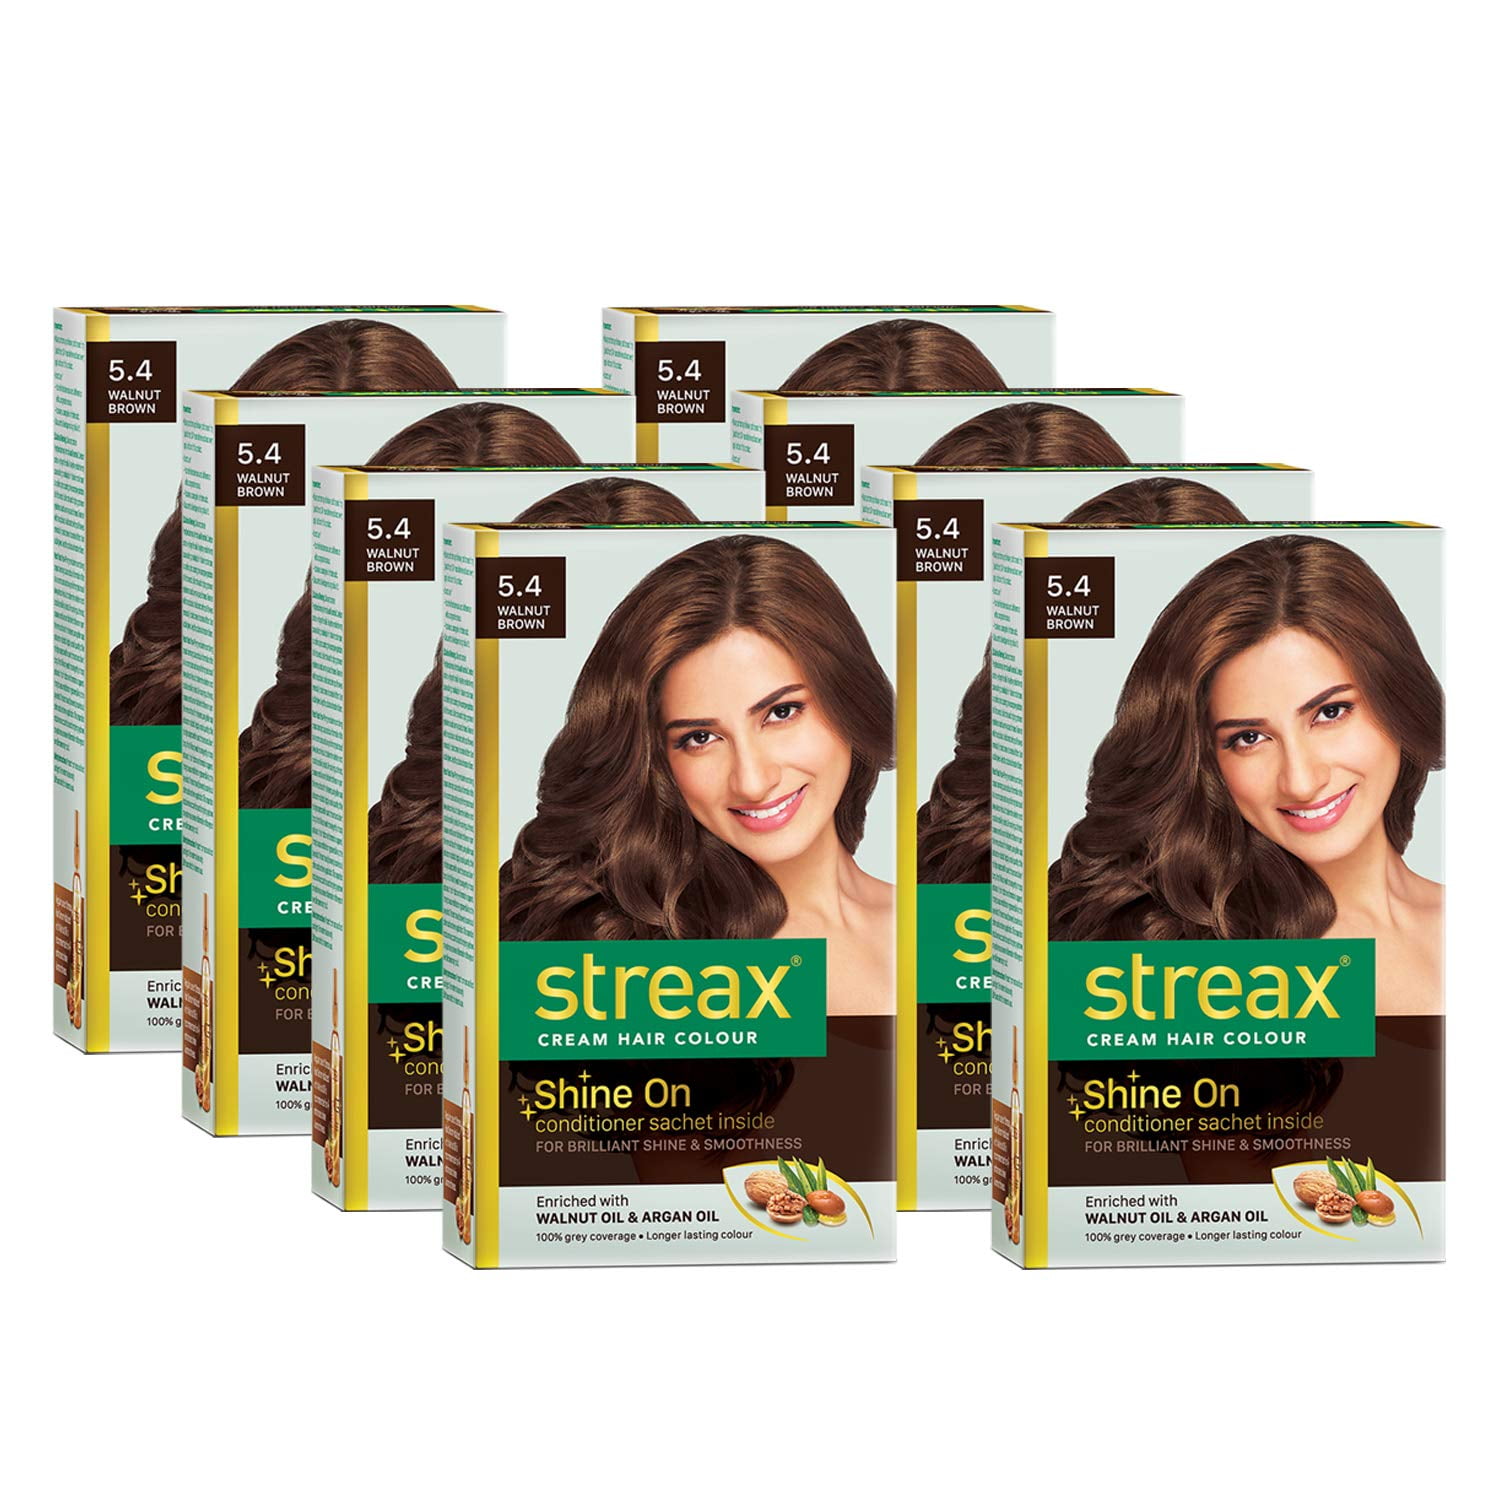 Streax Cream Hair Color for Unisex, 60ml  Walnut Brown (Pack of 8) -  